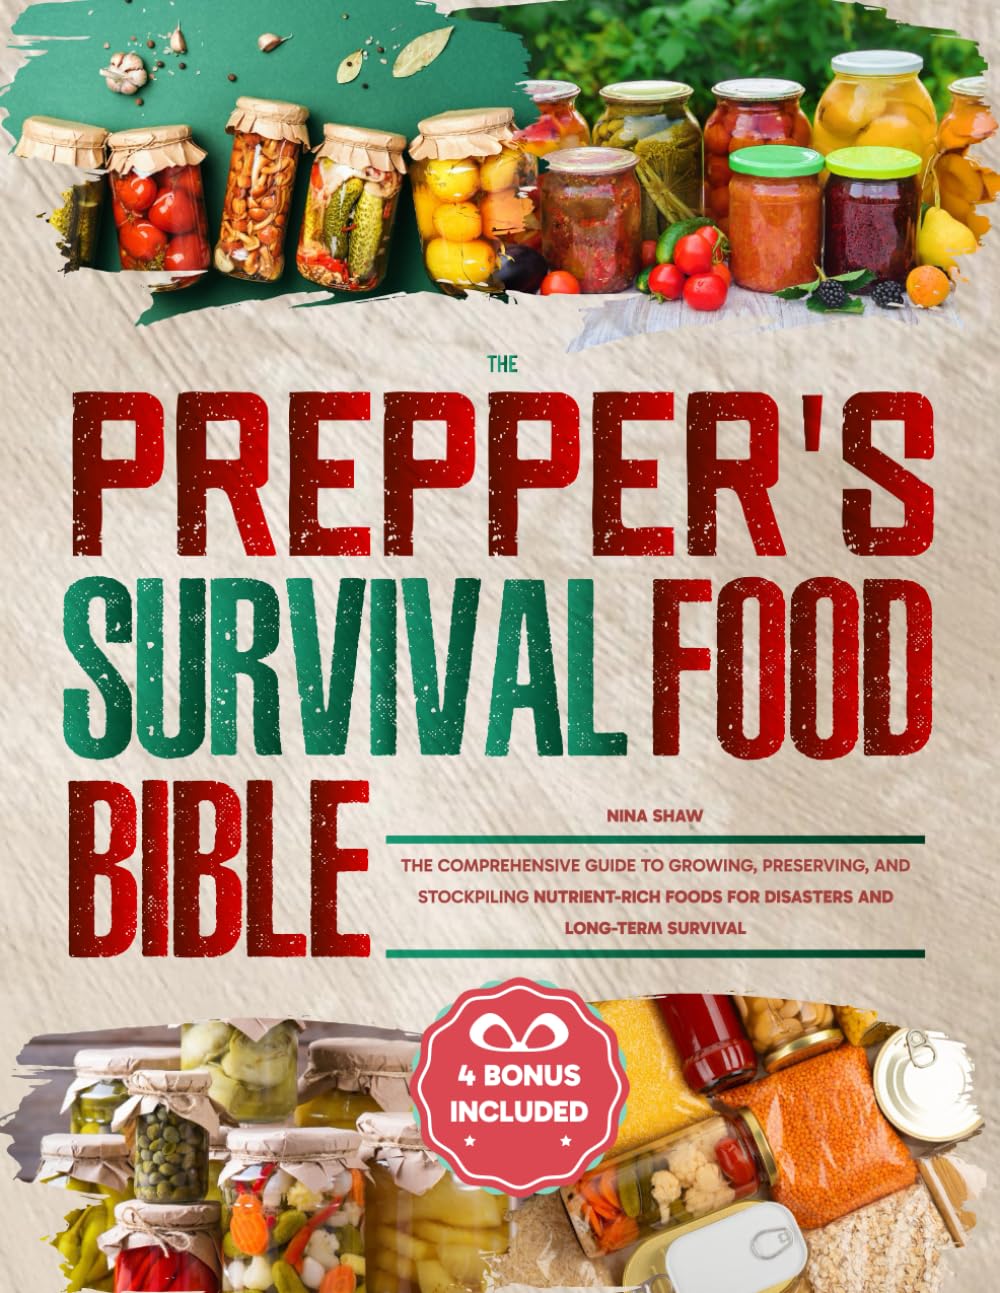 The Prepper's Survival Food Bible: The Comprehensive Guide to Growing, Preserving, and Stockpiling Nutrient-Rich Foods for Disasters and Long-Term Survival